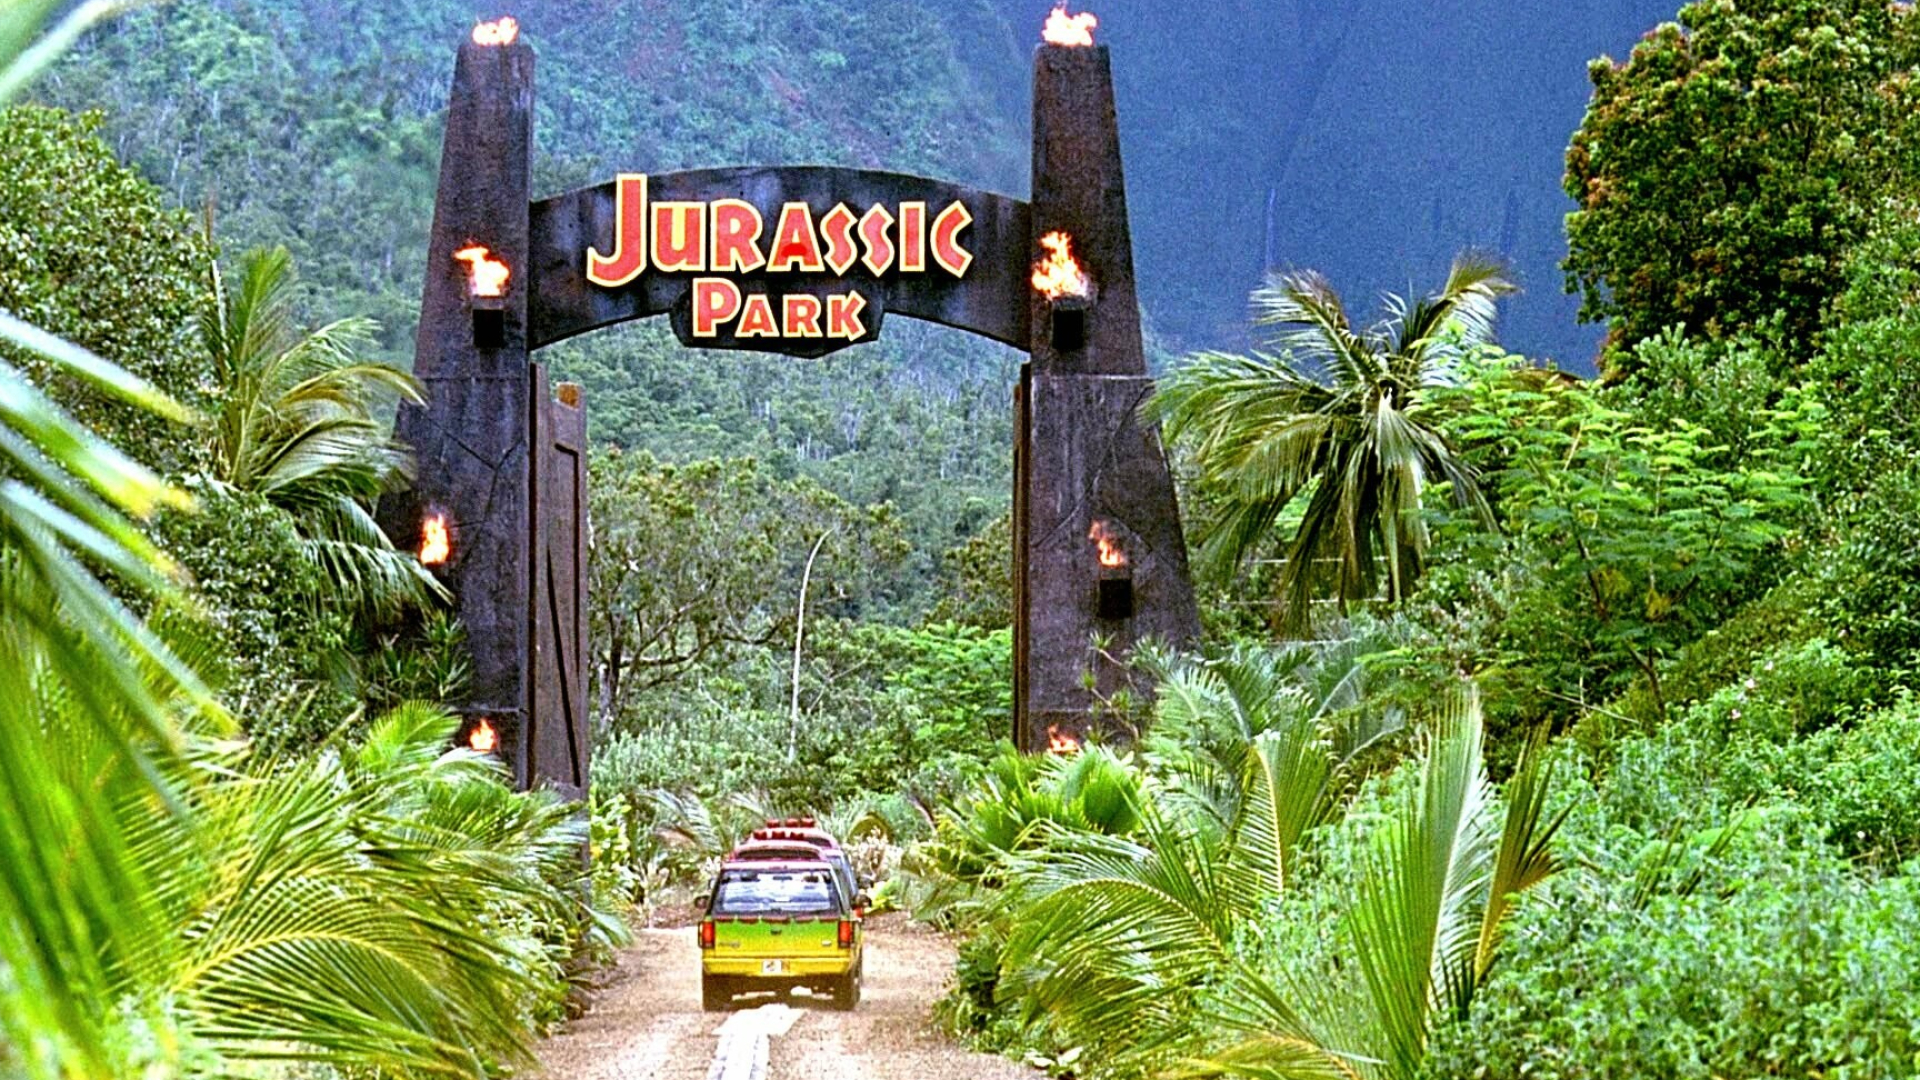 Jurassic Park: Adventure, Sci Fi, Fantasy, Dinosaur, Movie, The highest-grossing film ever at the time. 1920x1080 Full HD Background.